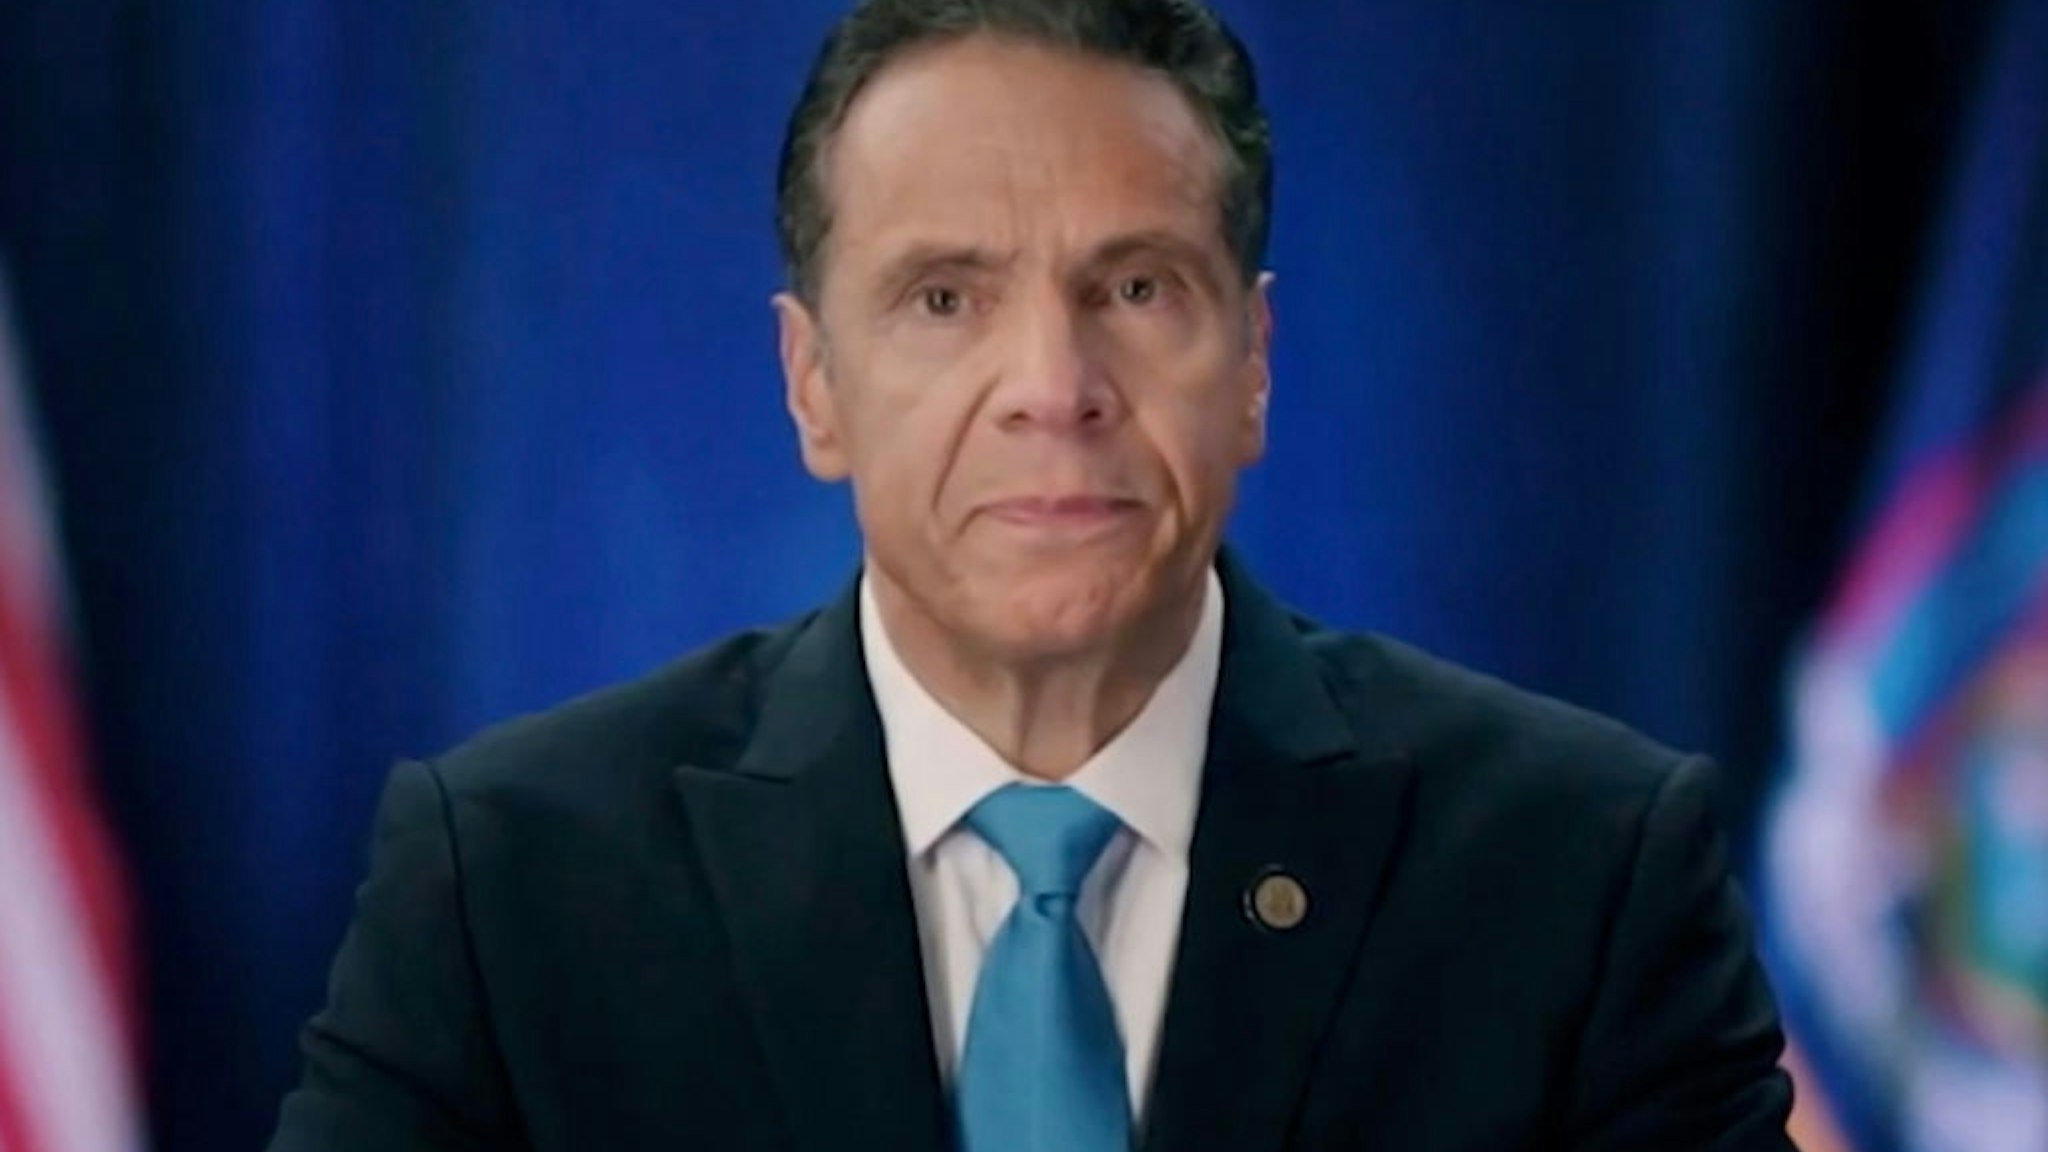 In this screenshot from the DNCC’s livestream of the 2020 Democratic National Convention, New York Gov. Andrew Cuomo addresses the virtual convention on August 17, 2020.